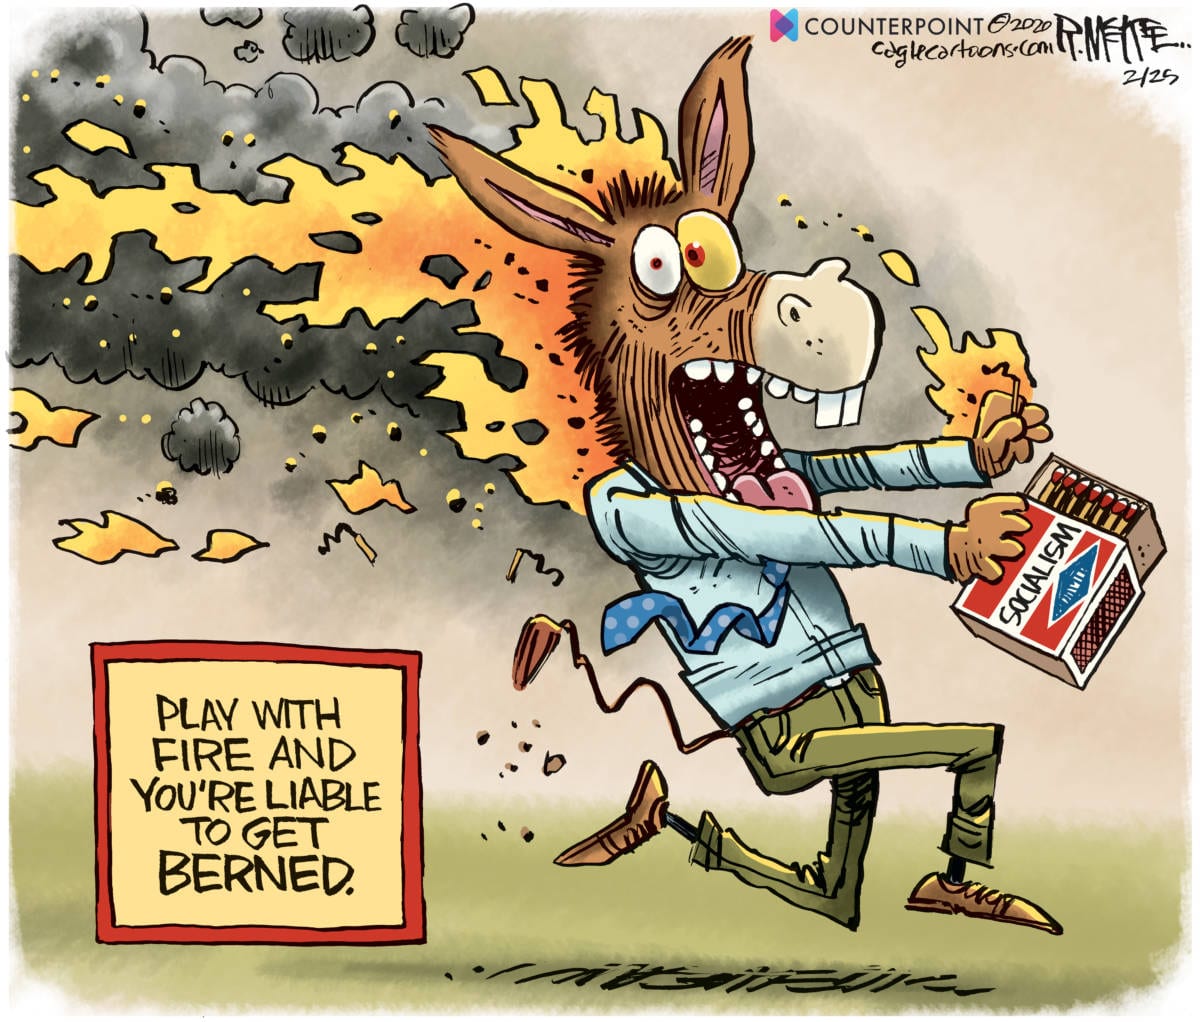 Democrats Berned by Rick McKee, Counterpoint